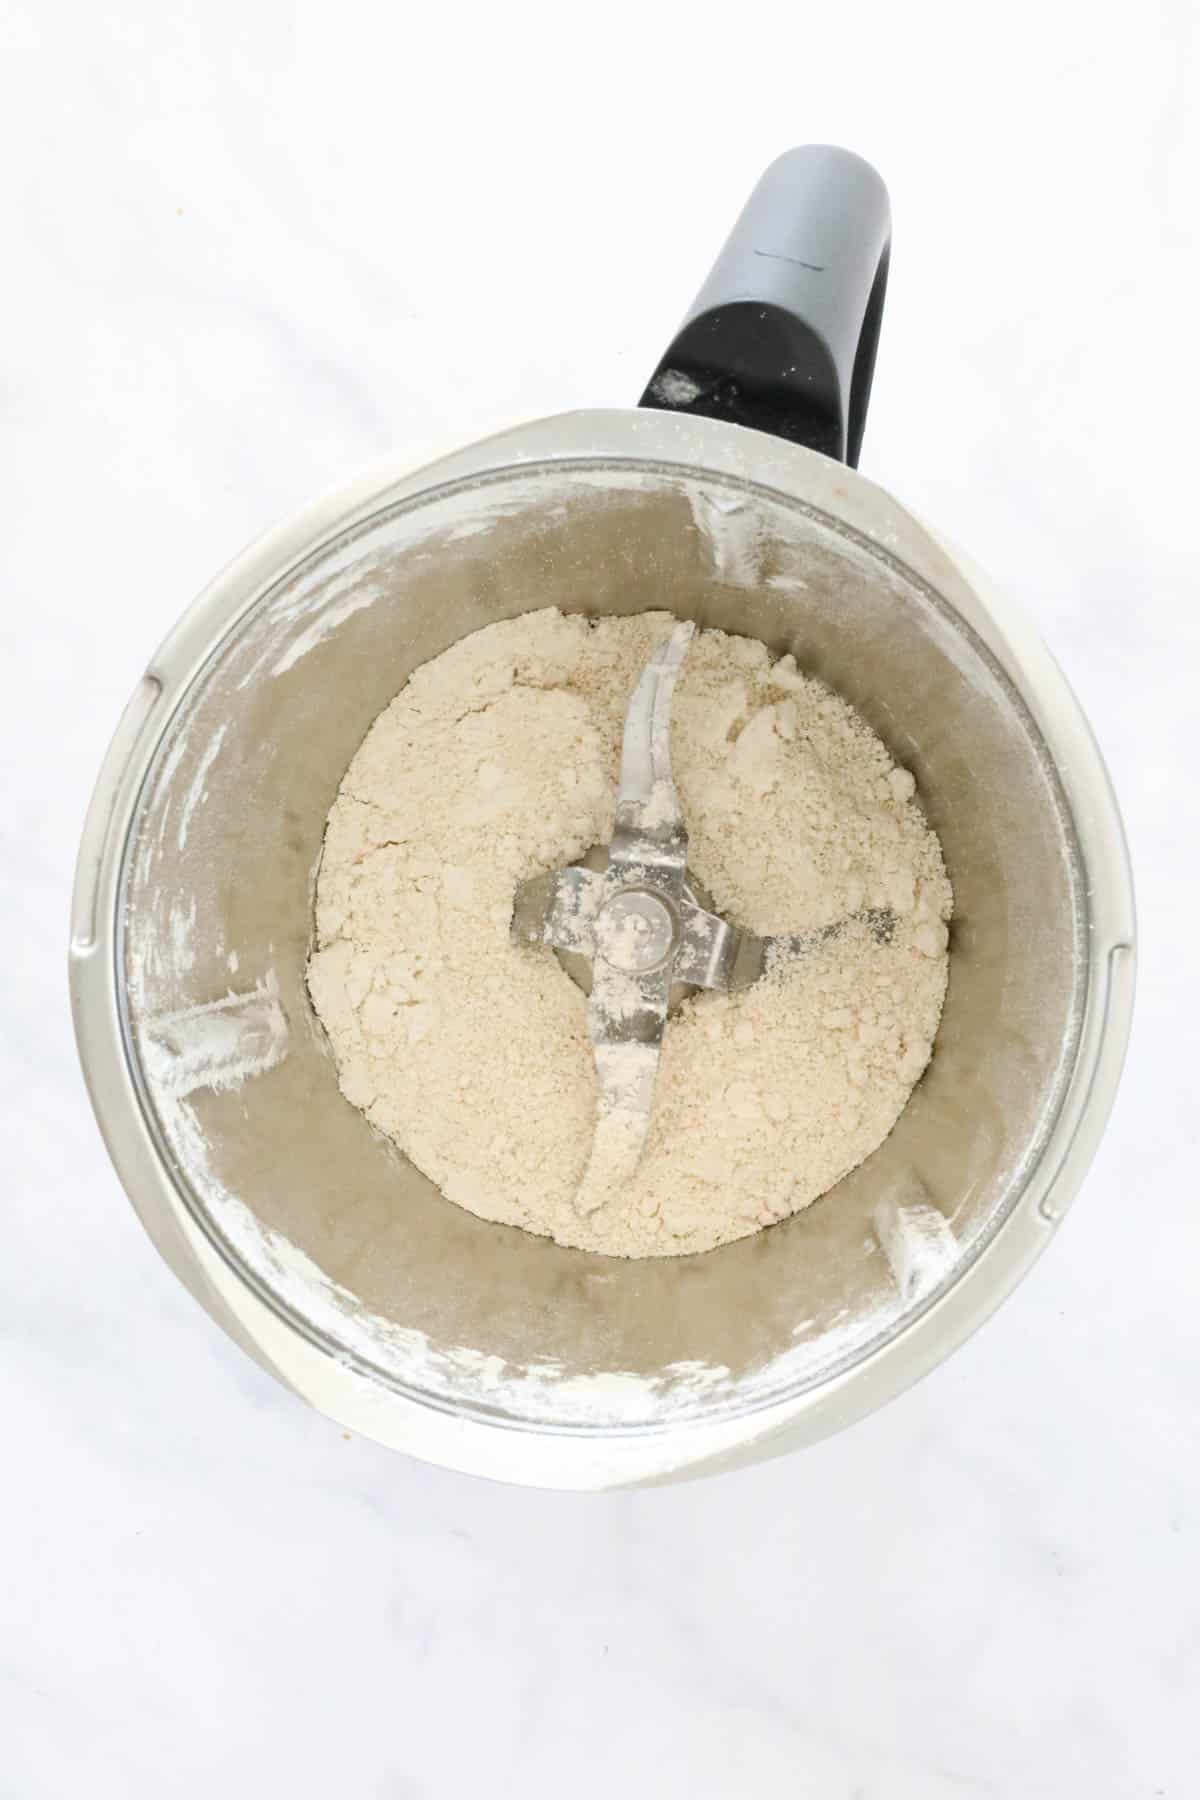 Oats blended to a fine powder in the bottom of a blender.